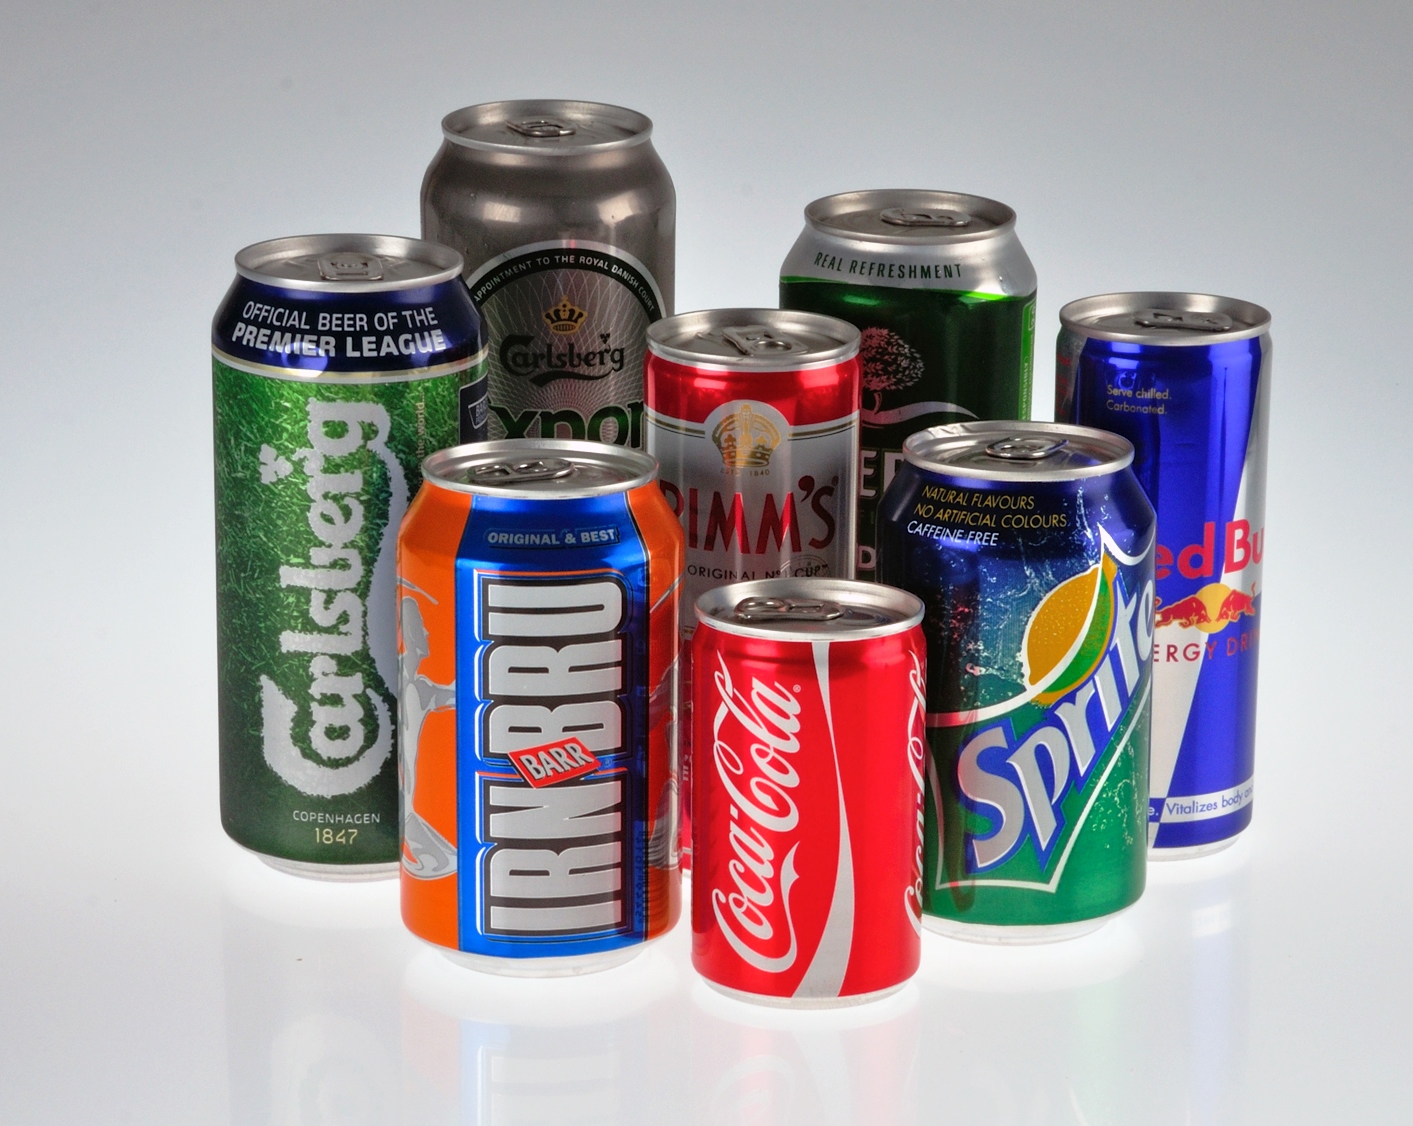 European recycling of aluminium  beverage cans  at record 